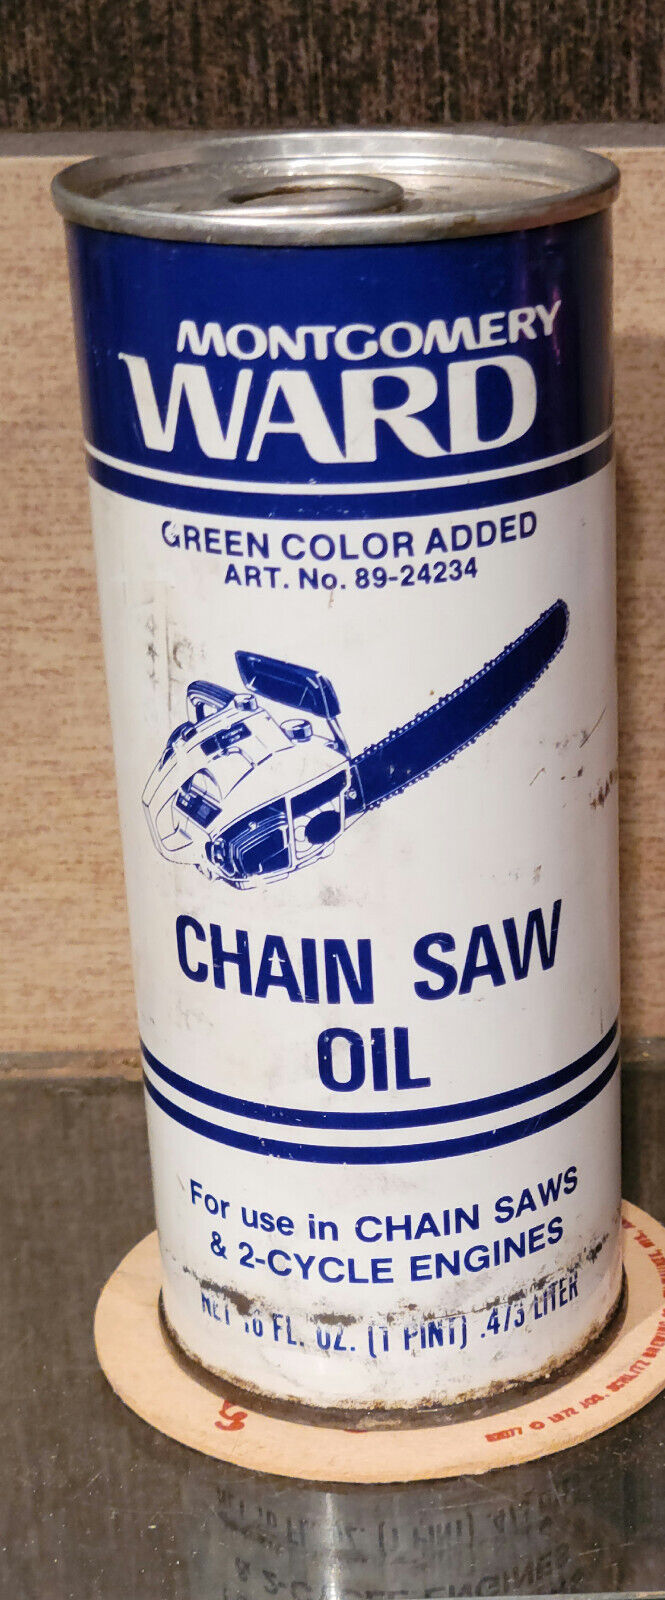 1960s FULL MONTGOMERY WARD Chainsaw Oil Metal Can 16 oz 2 Cycle Engine Oil